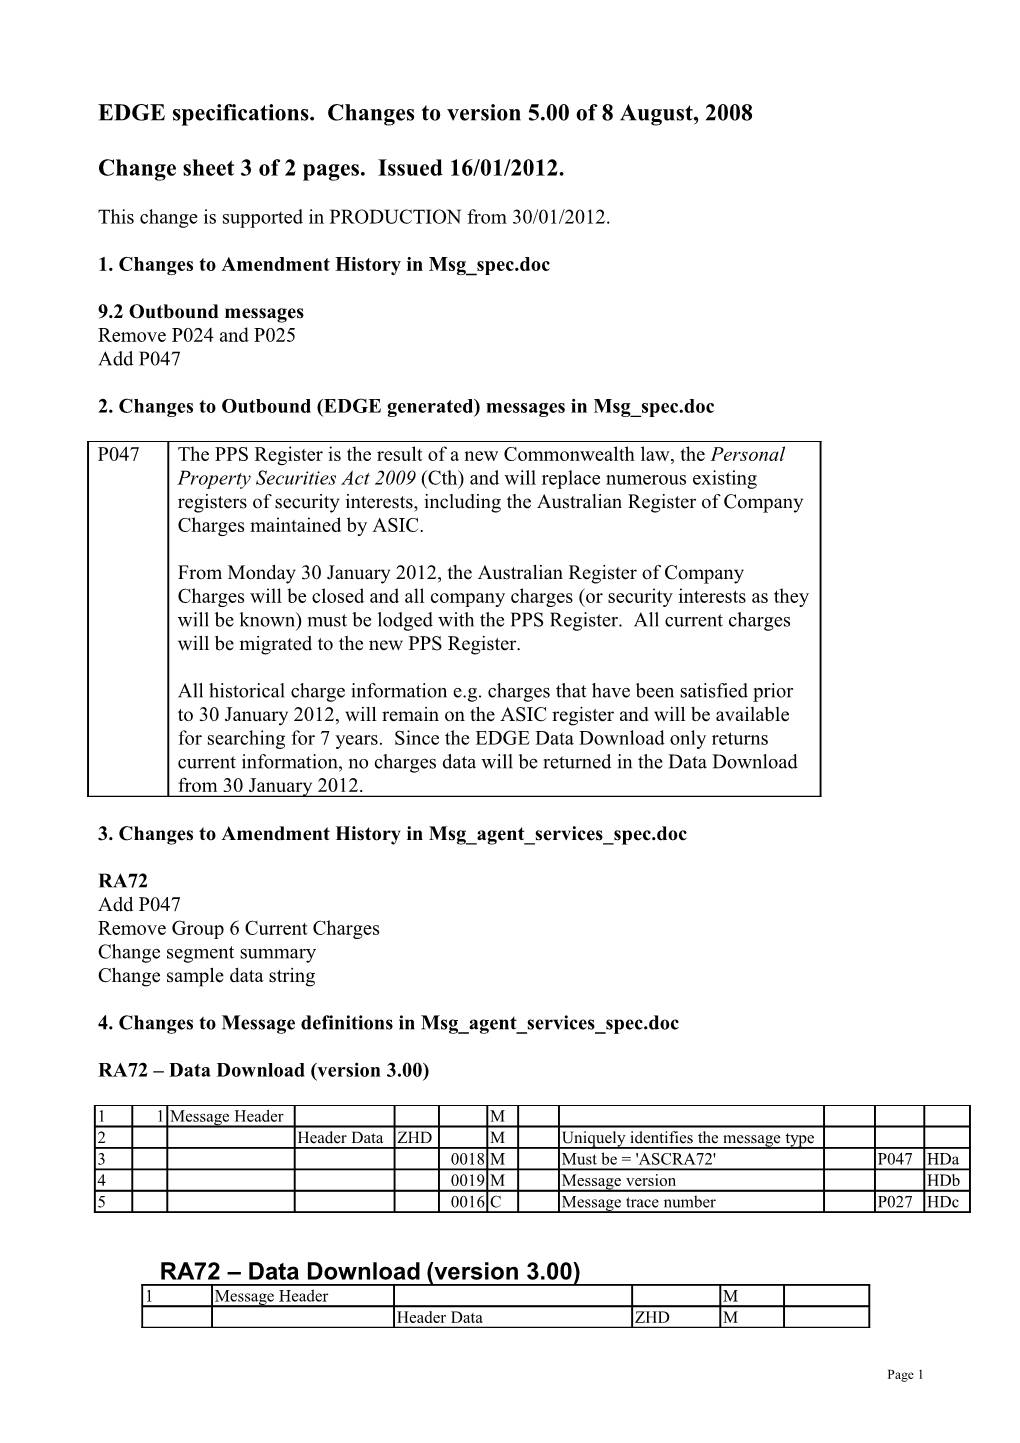 EDGE Specifications. Changes to Version 5.00 of 8 August, 2008